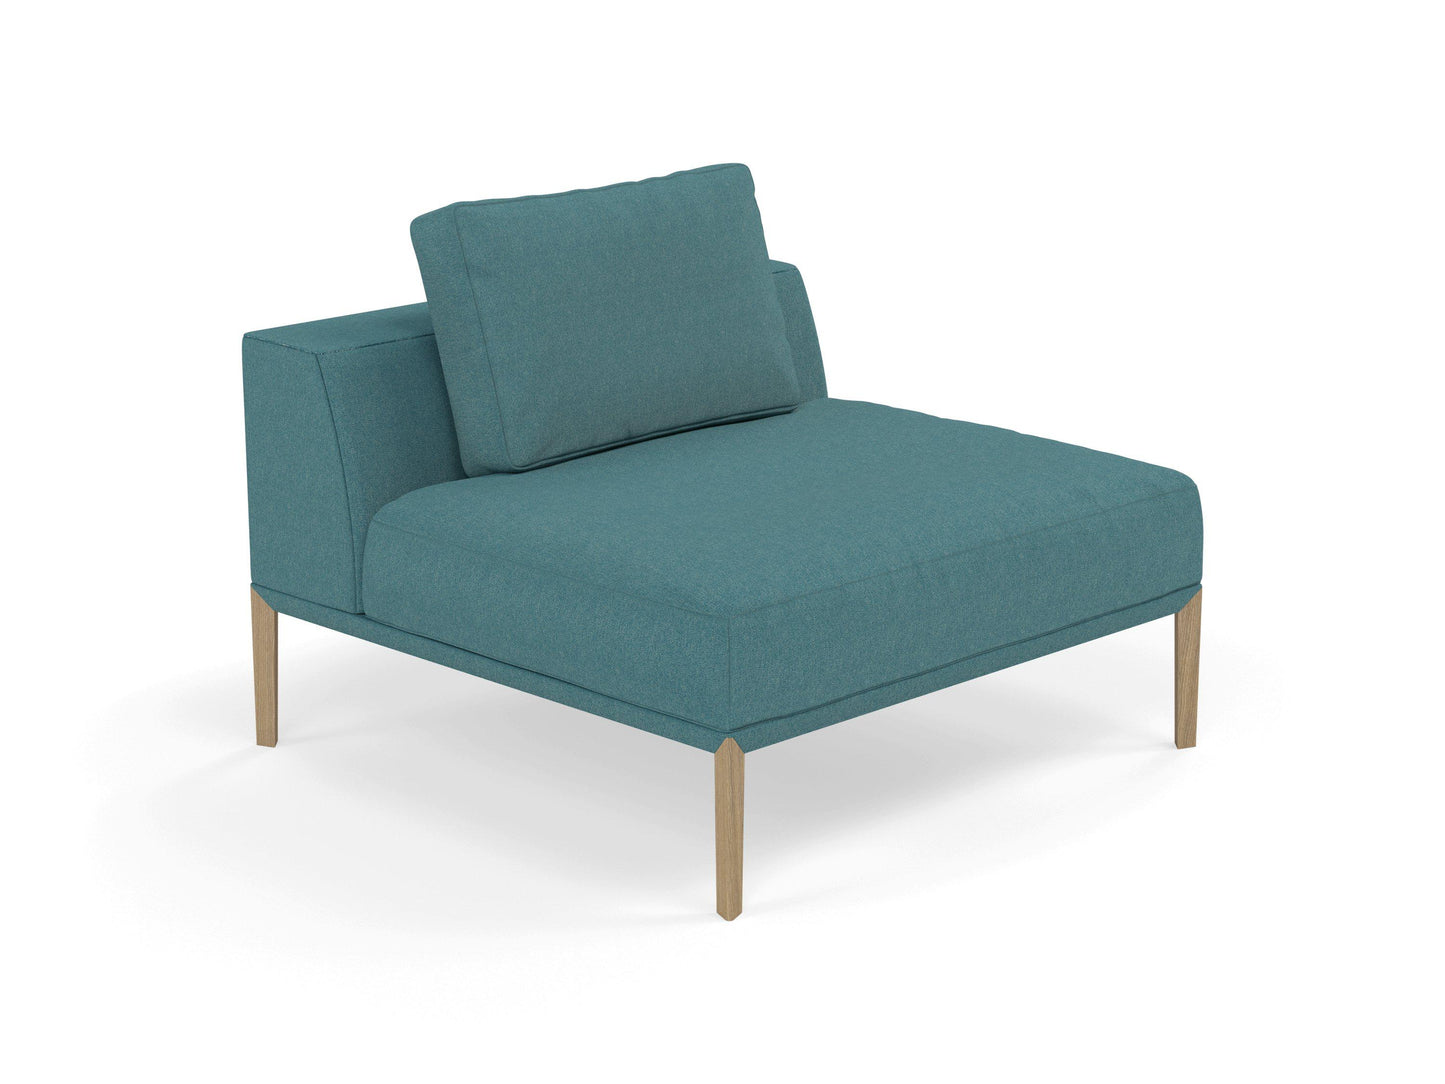 Modern Armchair 1 Seater Sofa without armrests in Teal Blue Fabric-Distinct Designs (London) Ltd